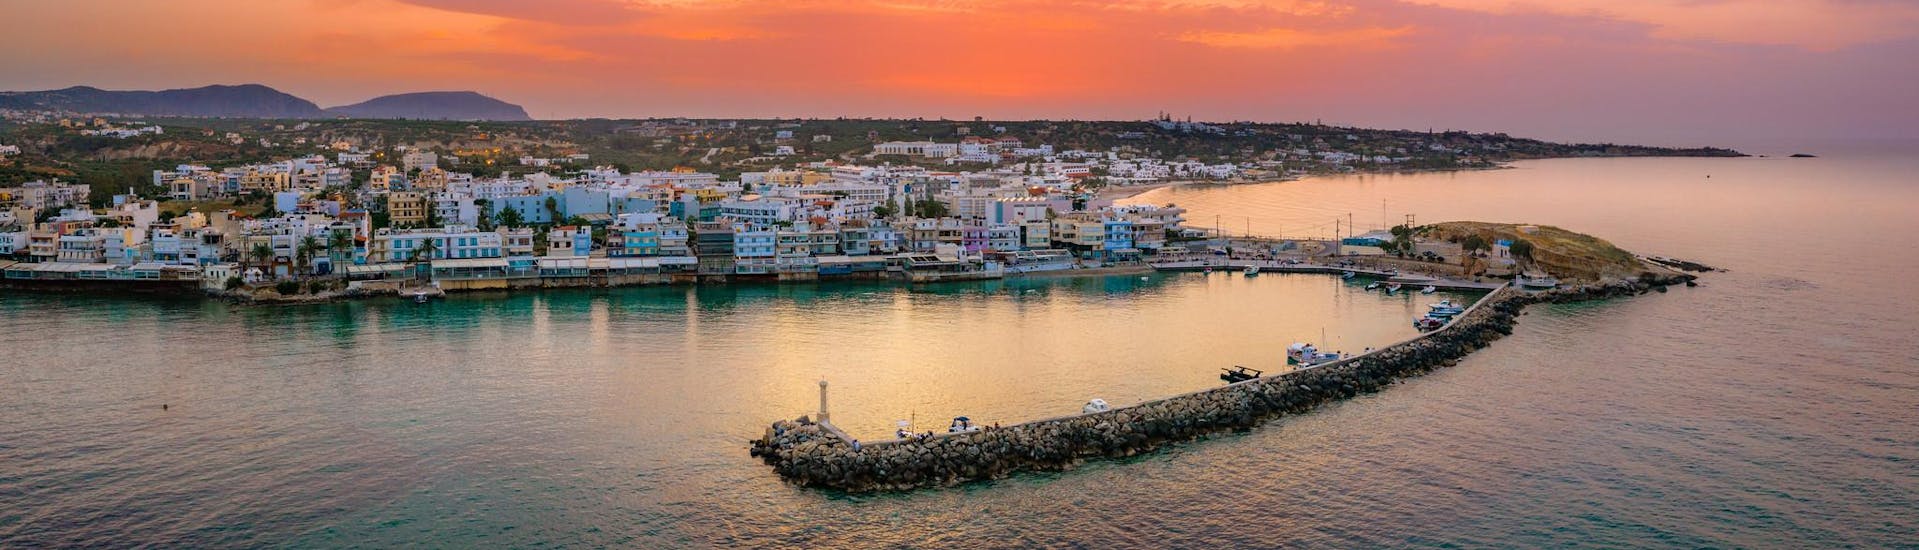 View of the coast of Hersonissos at sunset.